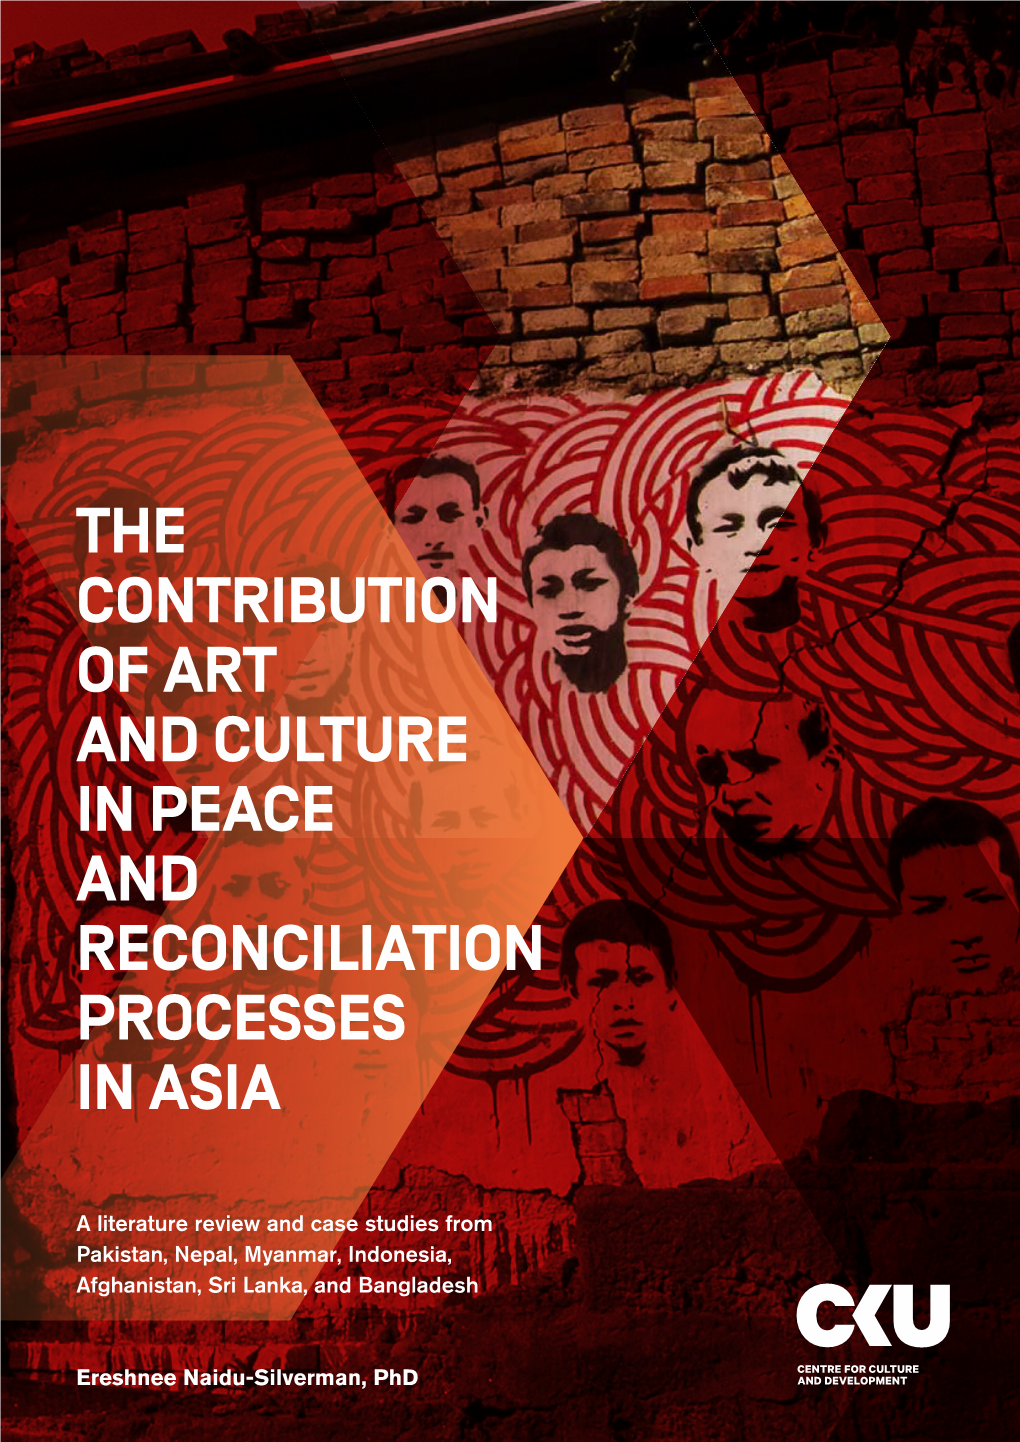 The Contribution of Art and Culture in Peace and Reconciliation Processes in Asia